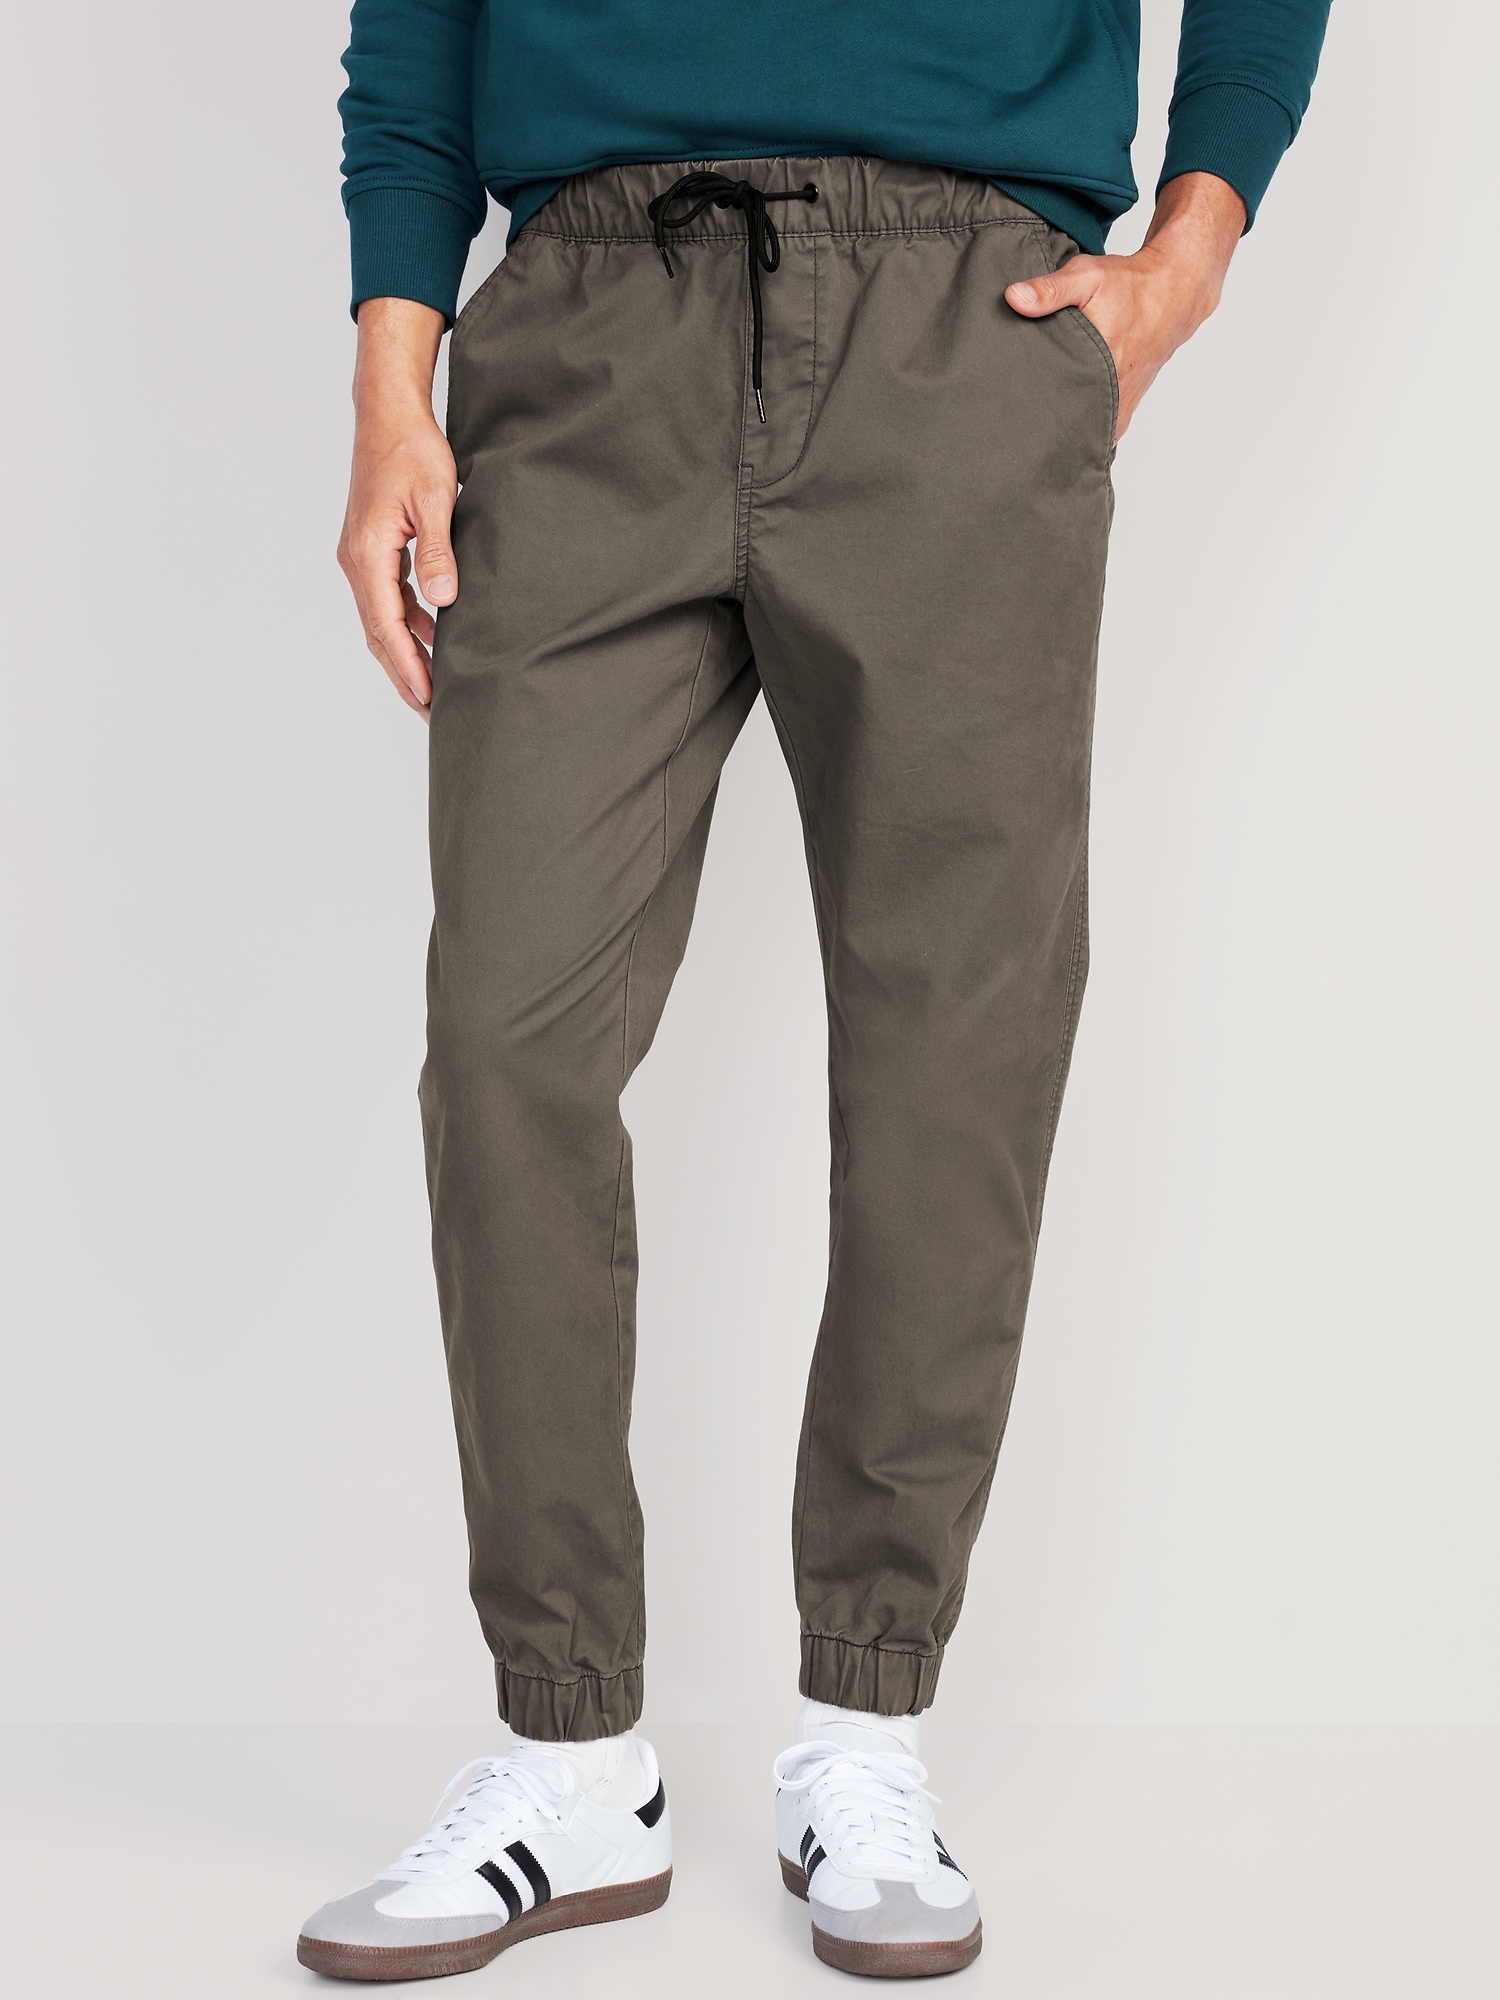 Black Anchor Jogger Pants - Hope Outfitters